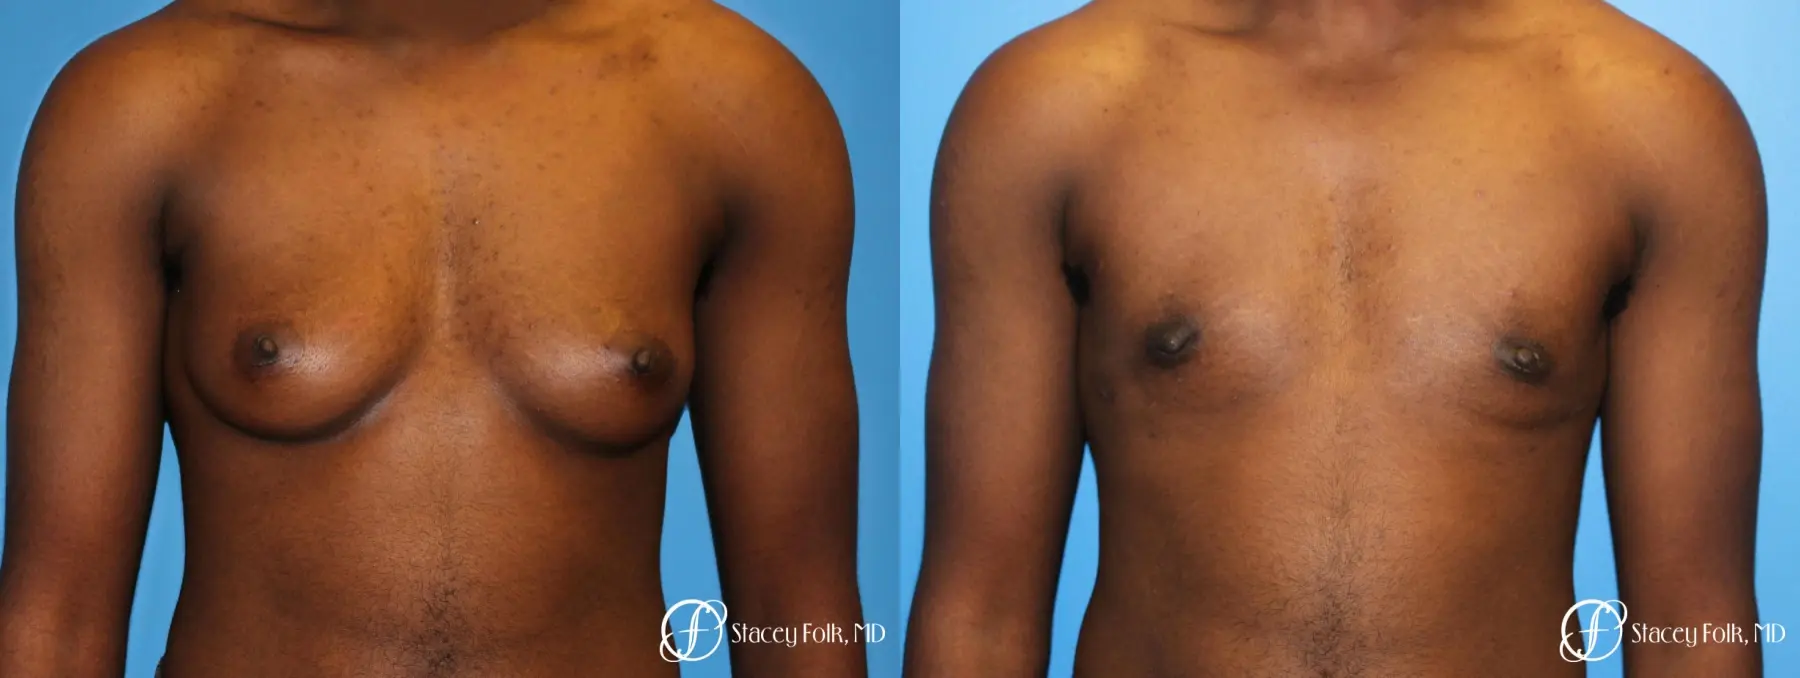 Denver FTM Female to male top surgery using gynecomastia technique 5497 - Before and After